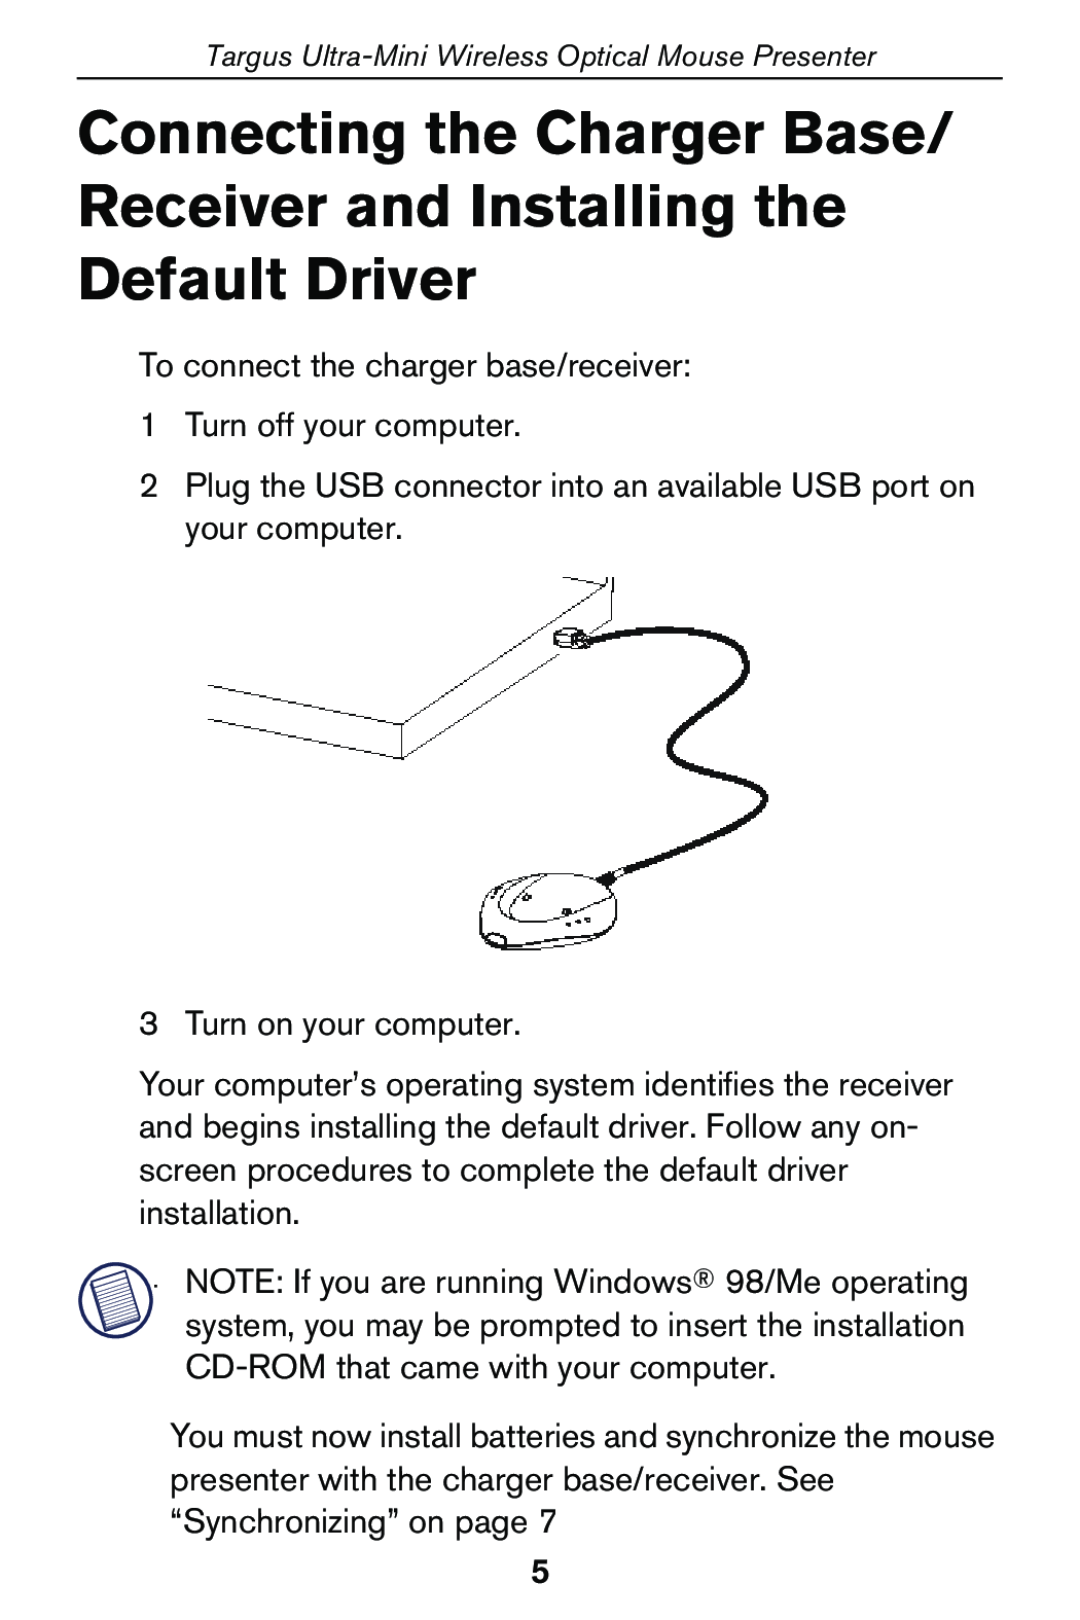 Targus 400-0140-001A specifications Connecting the Charger Base Receiver and Installing the, Default Driver 